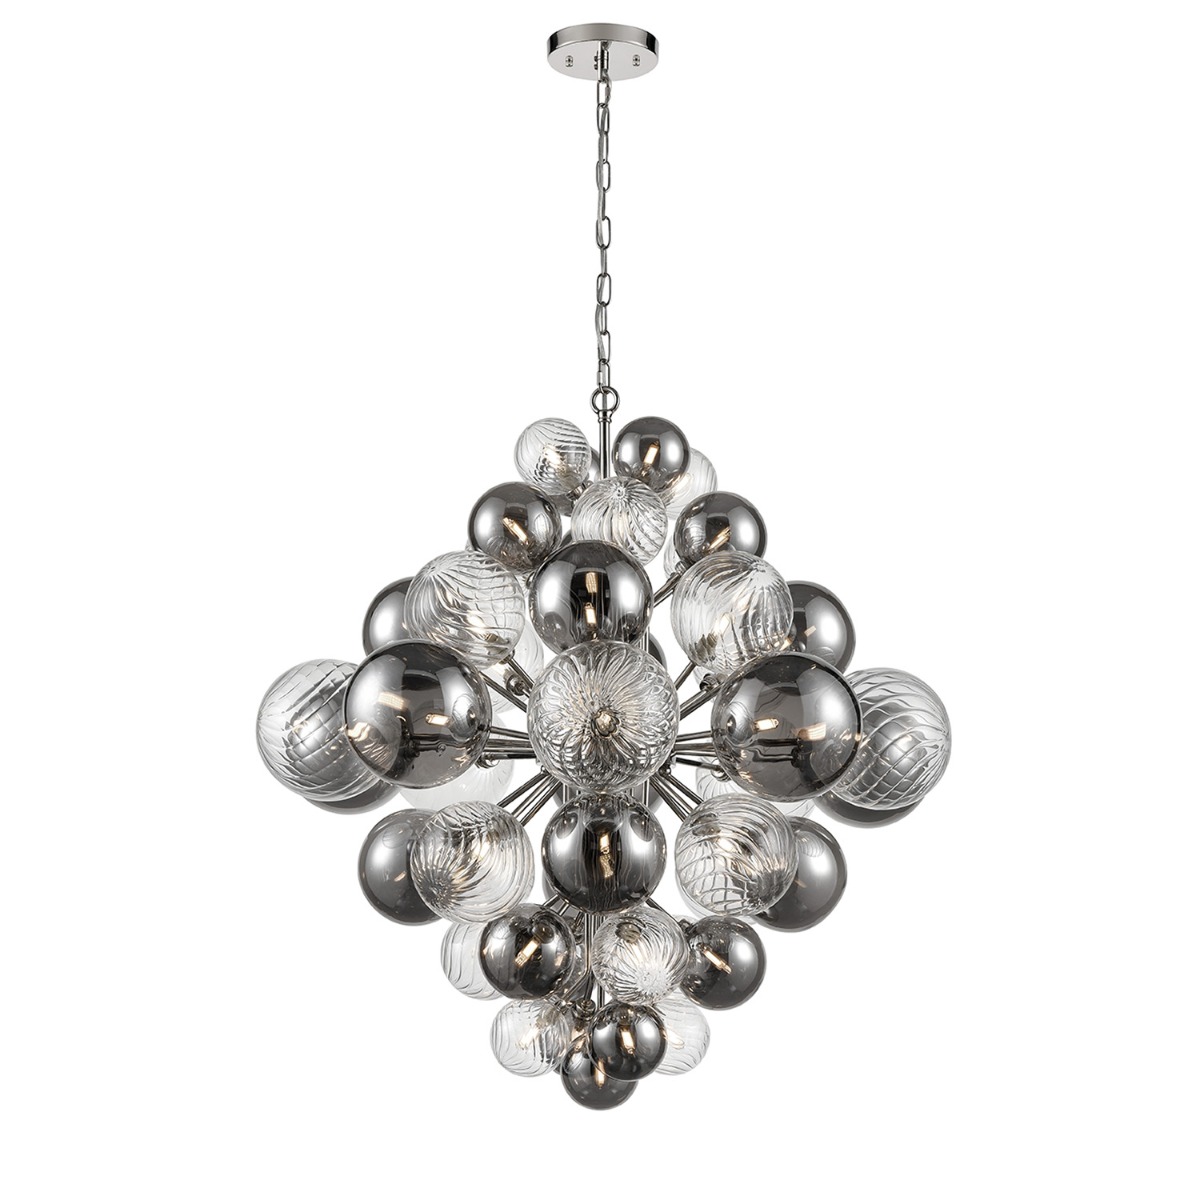 Image of Show 47 Light Ceiling Pendant Light In Chrome Finish With Multicoloured Glass F2451-47